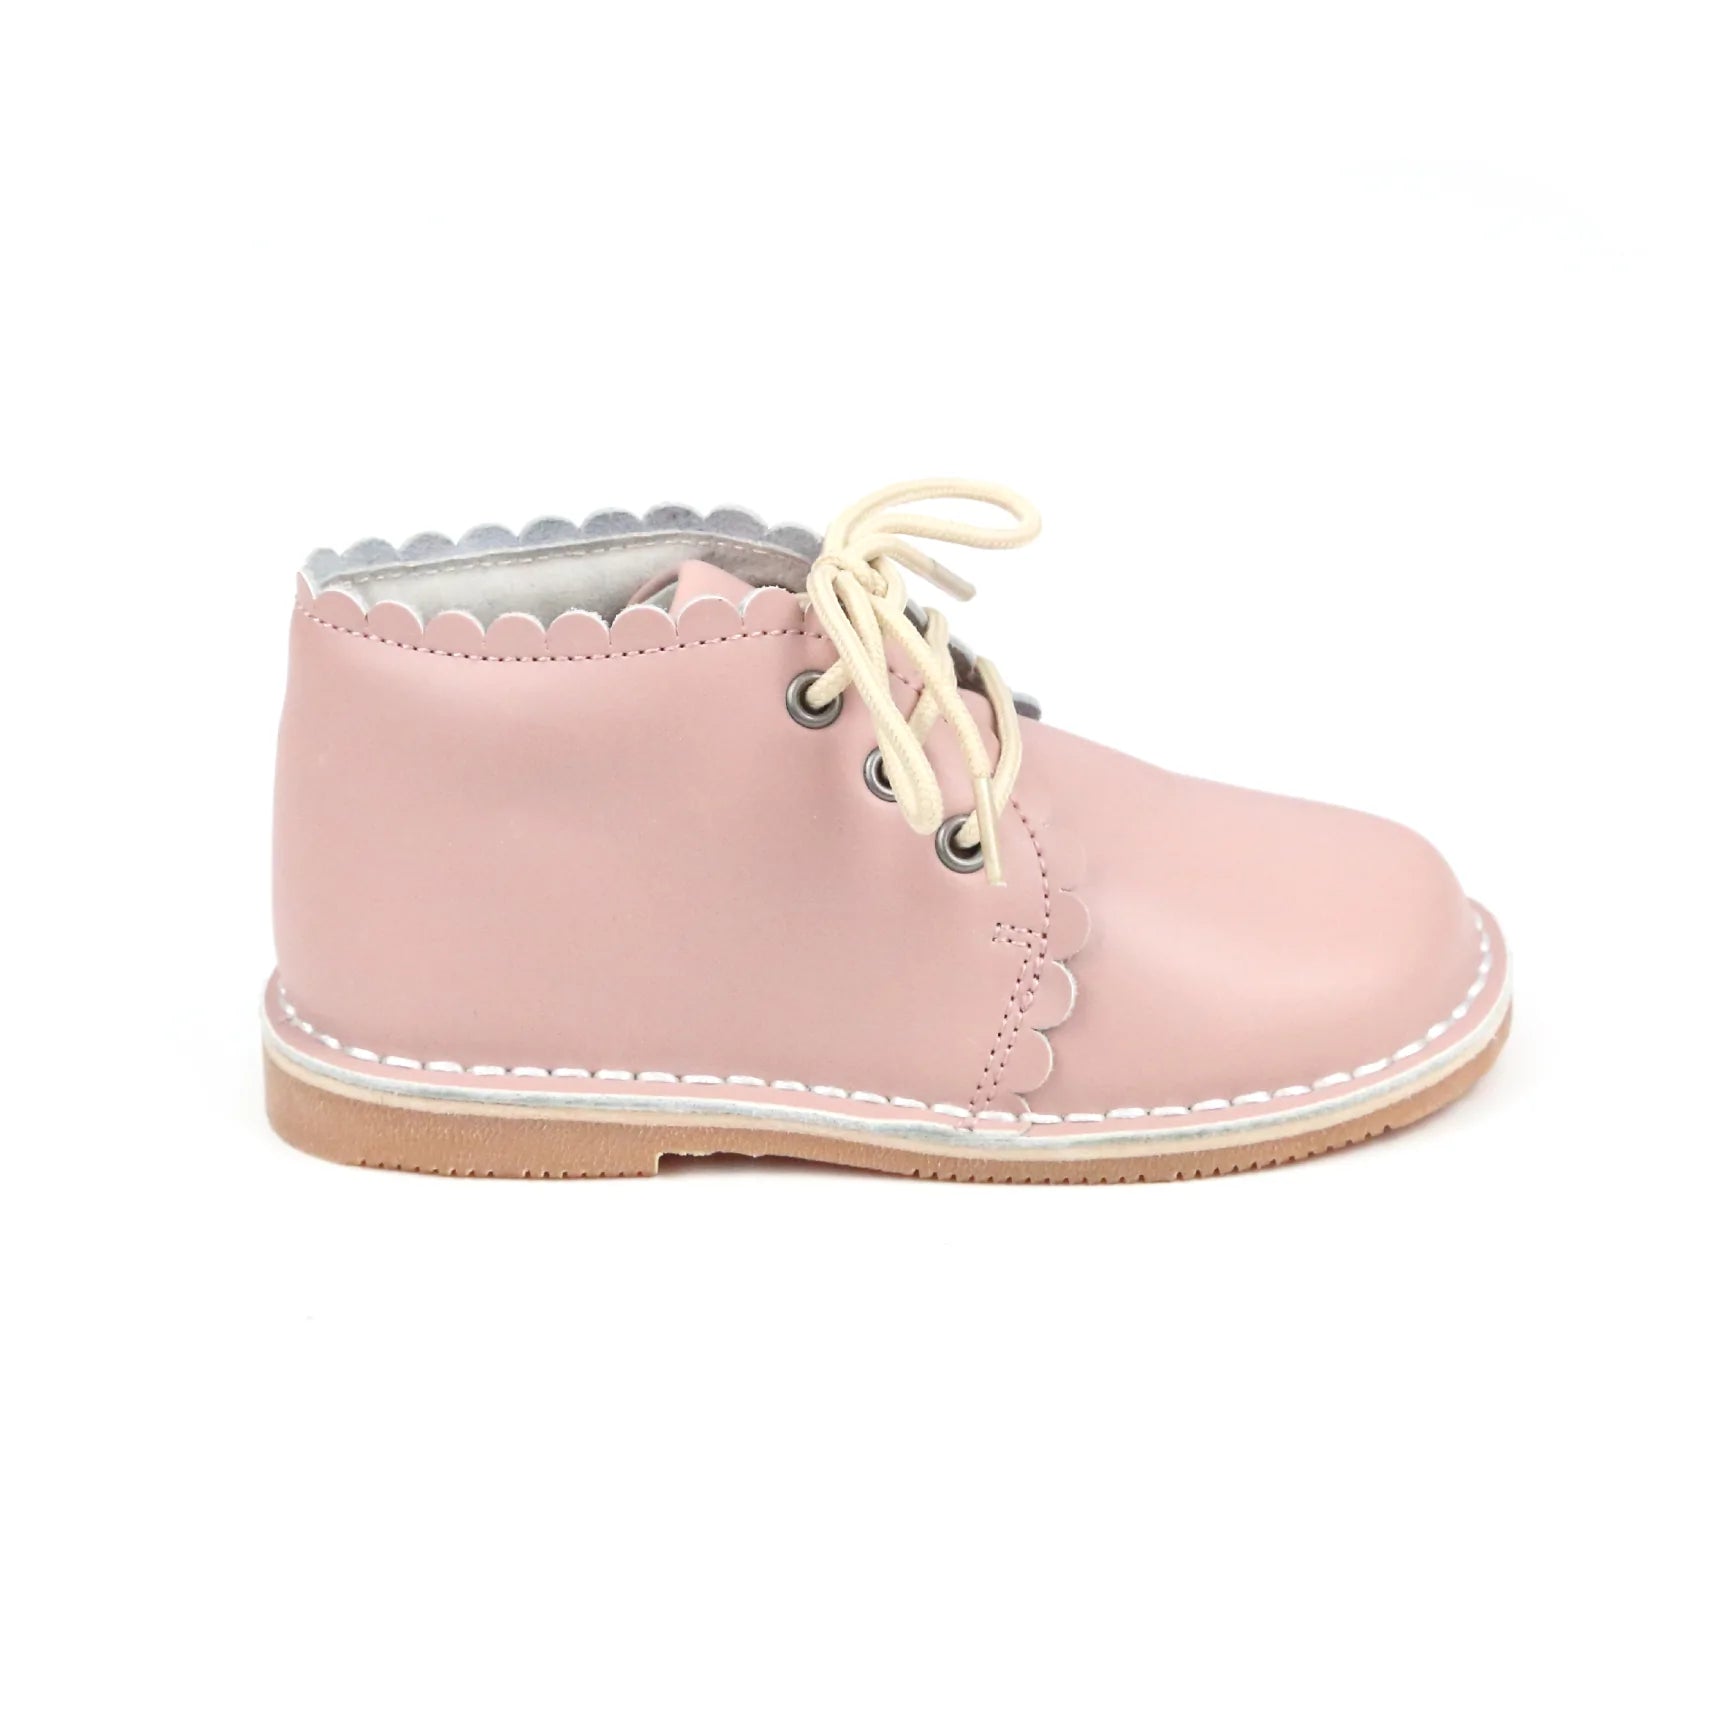 Georgie Scalloped Lace Up Boot in Dusty Pink  - Doodlebug's Children's Boutique